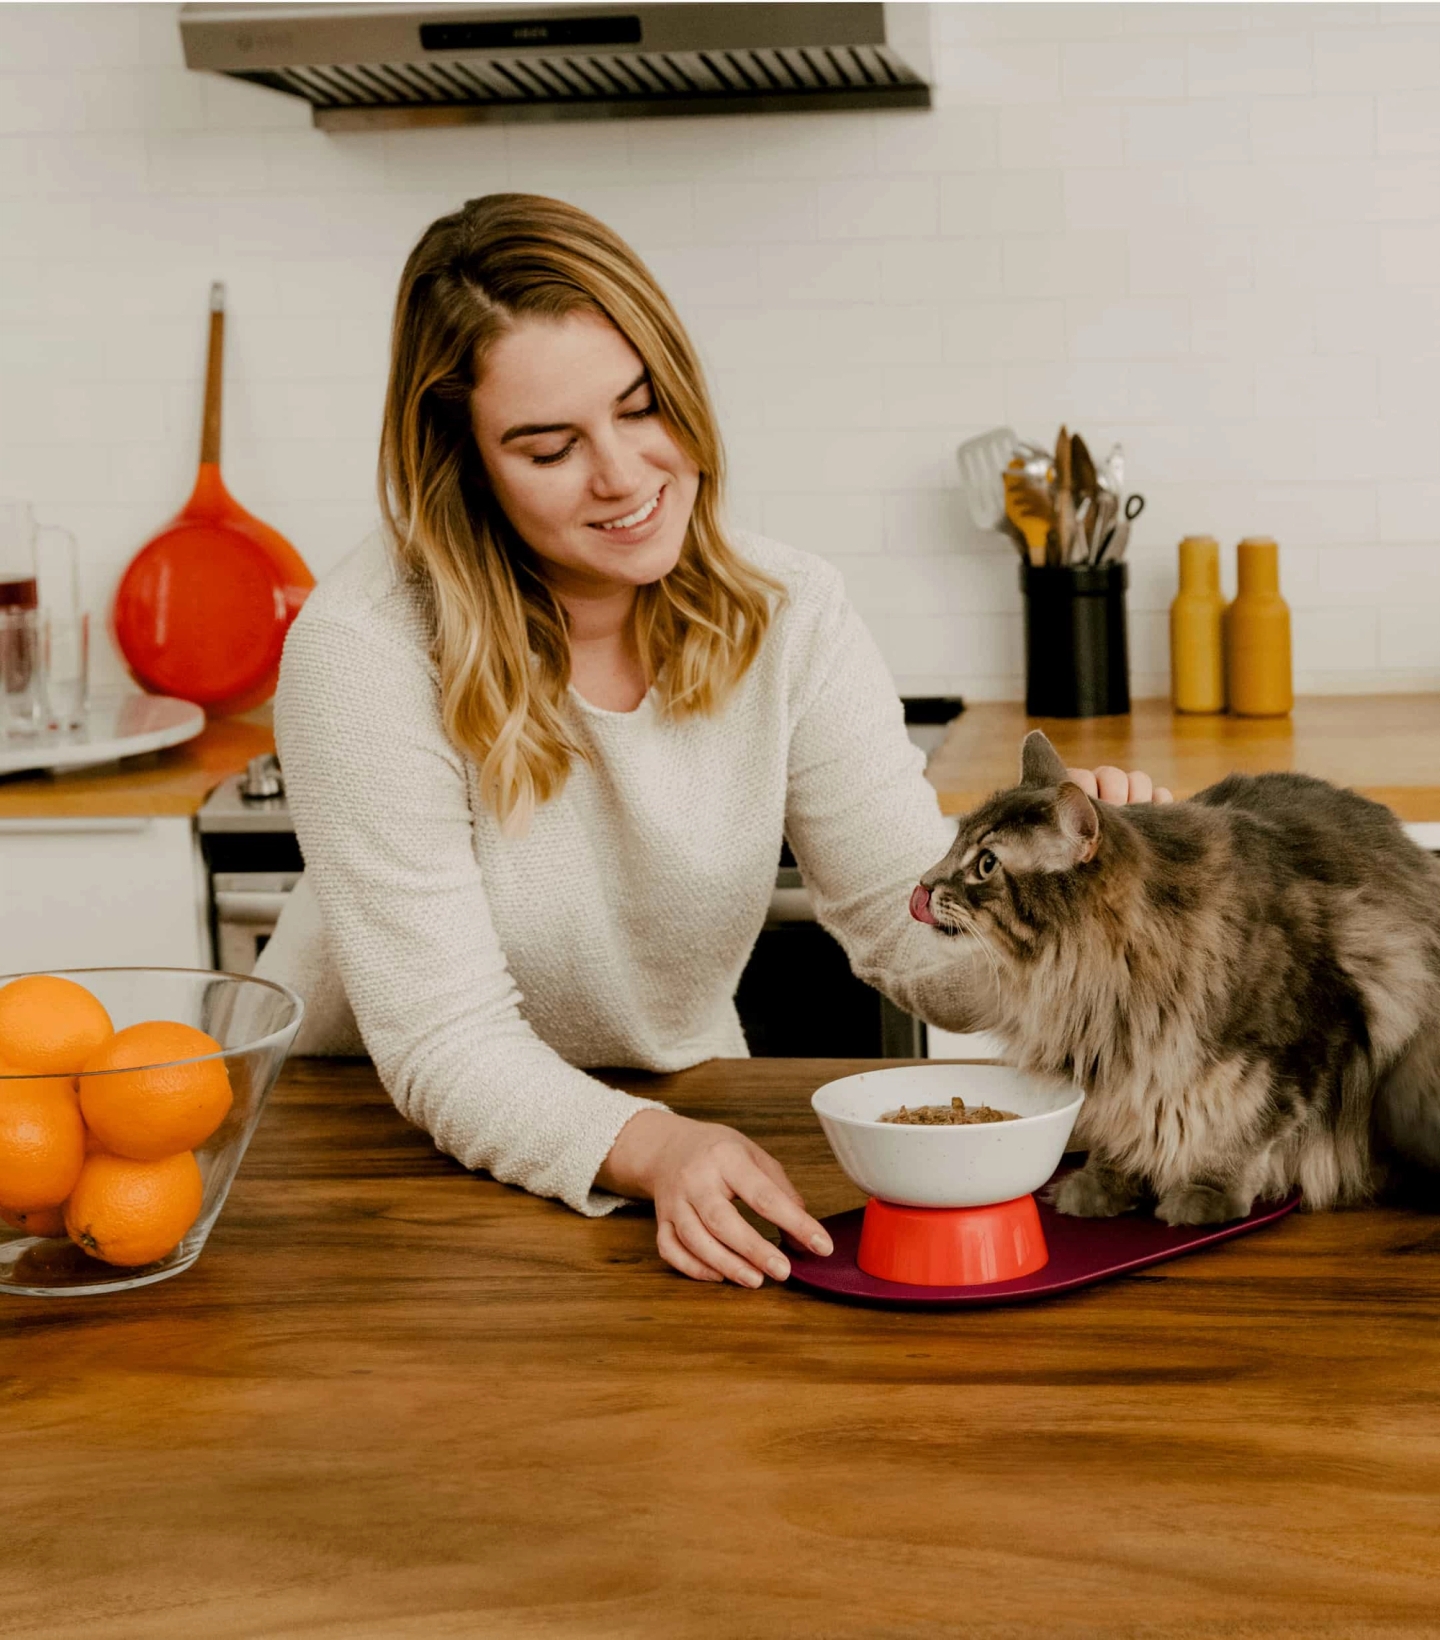 Smiling woman petting long-haired cat that is eating Cat Person wet food out of a Cat Person Mesa Bowl